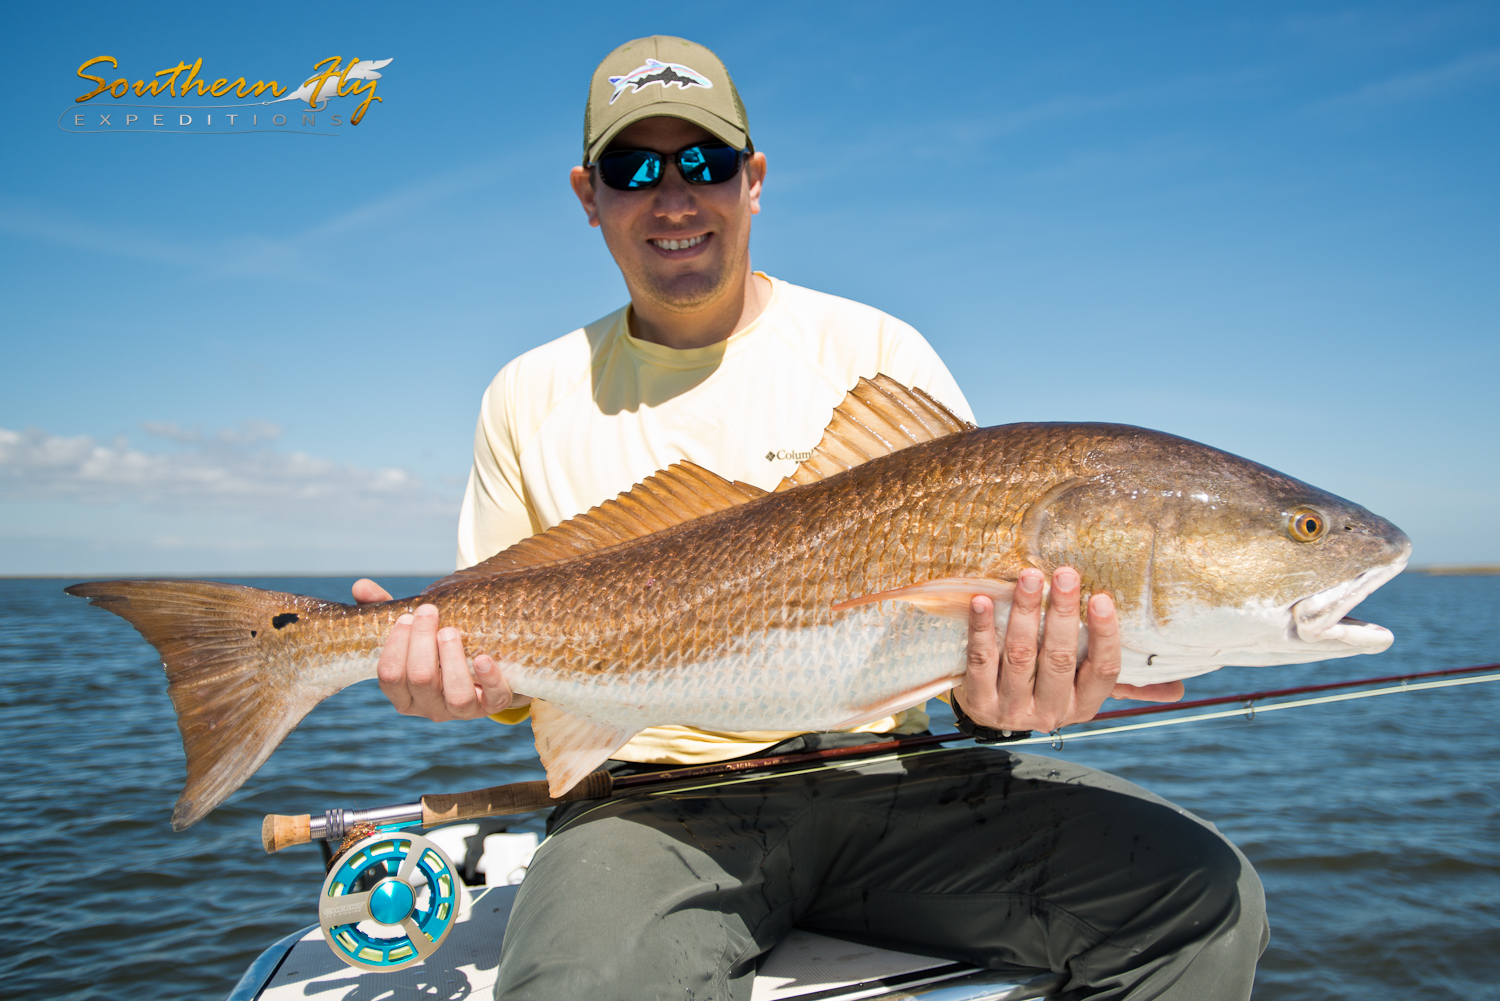 Fly Fishing Trip New Orleans with Southern Fly Expeditions 